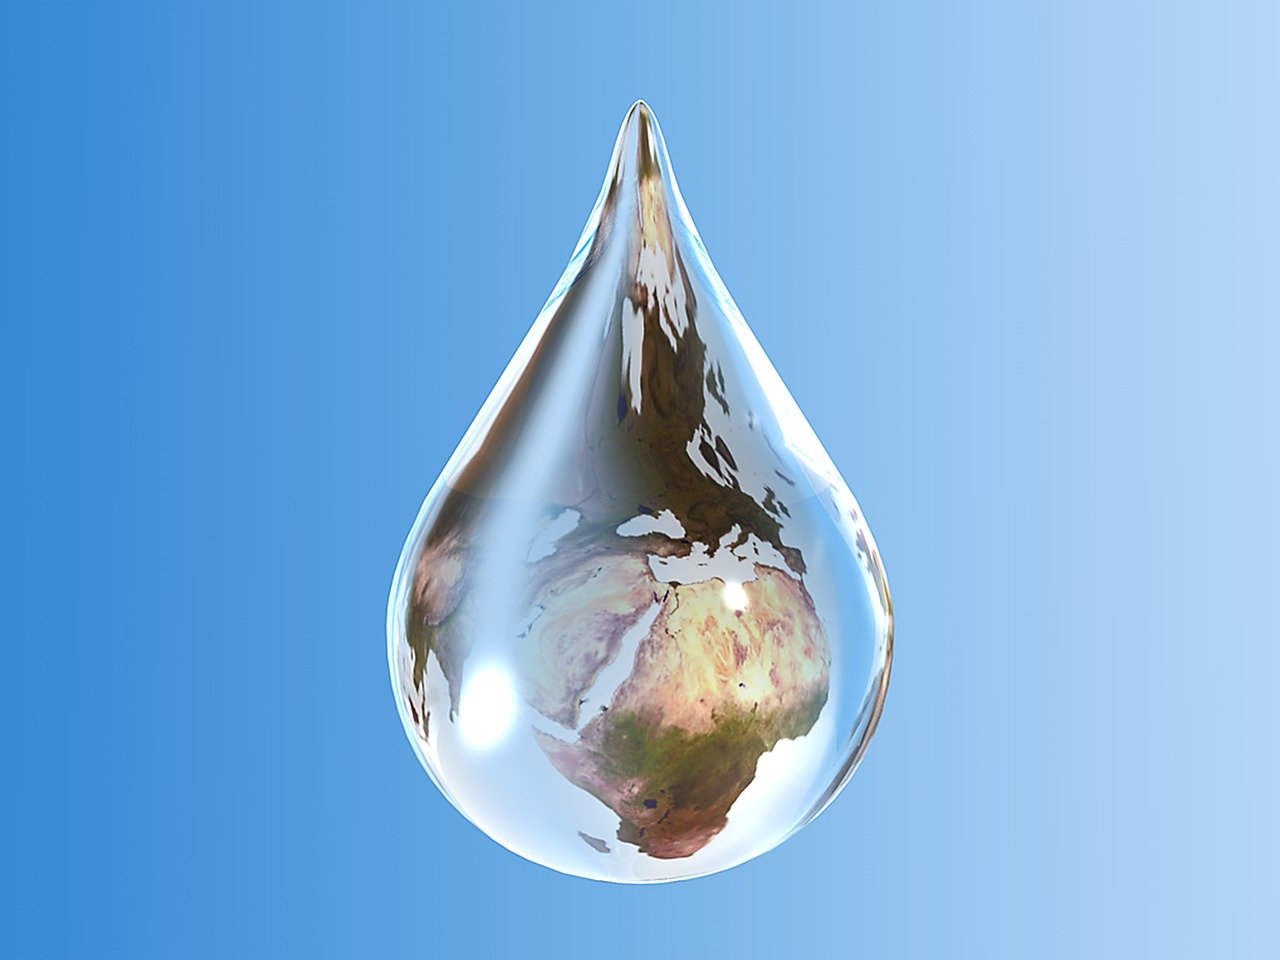 Image of continents within droplet of water on blue background